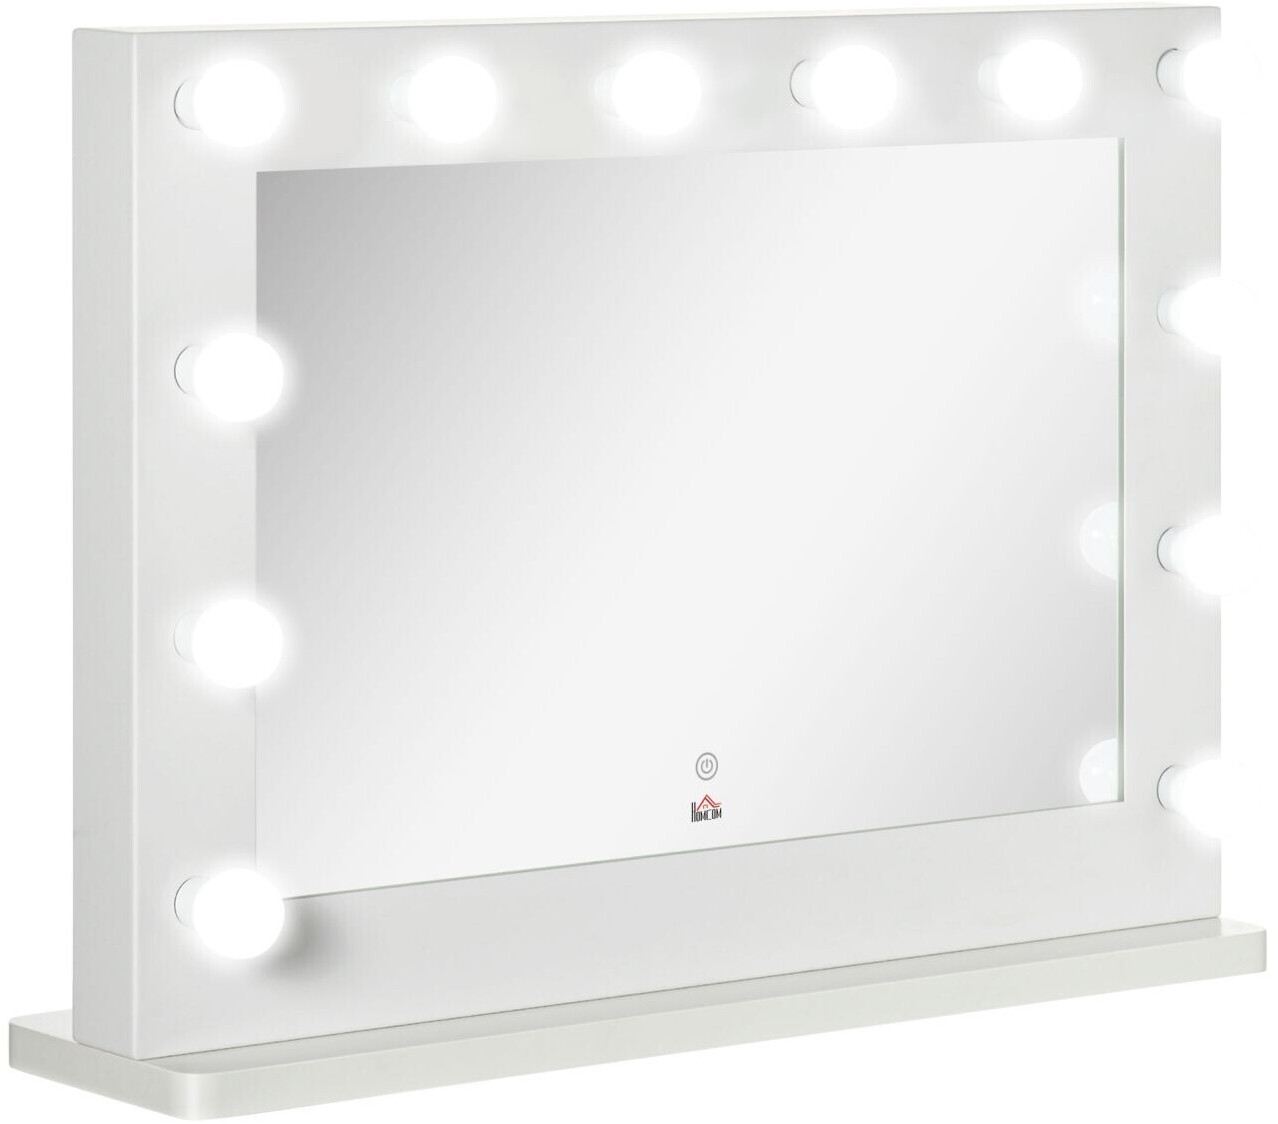  MACAO LED Hollywood Spiegel 60x80 mit Beleuchtung, 18